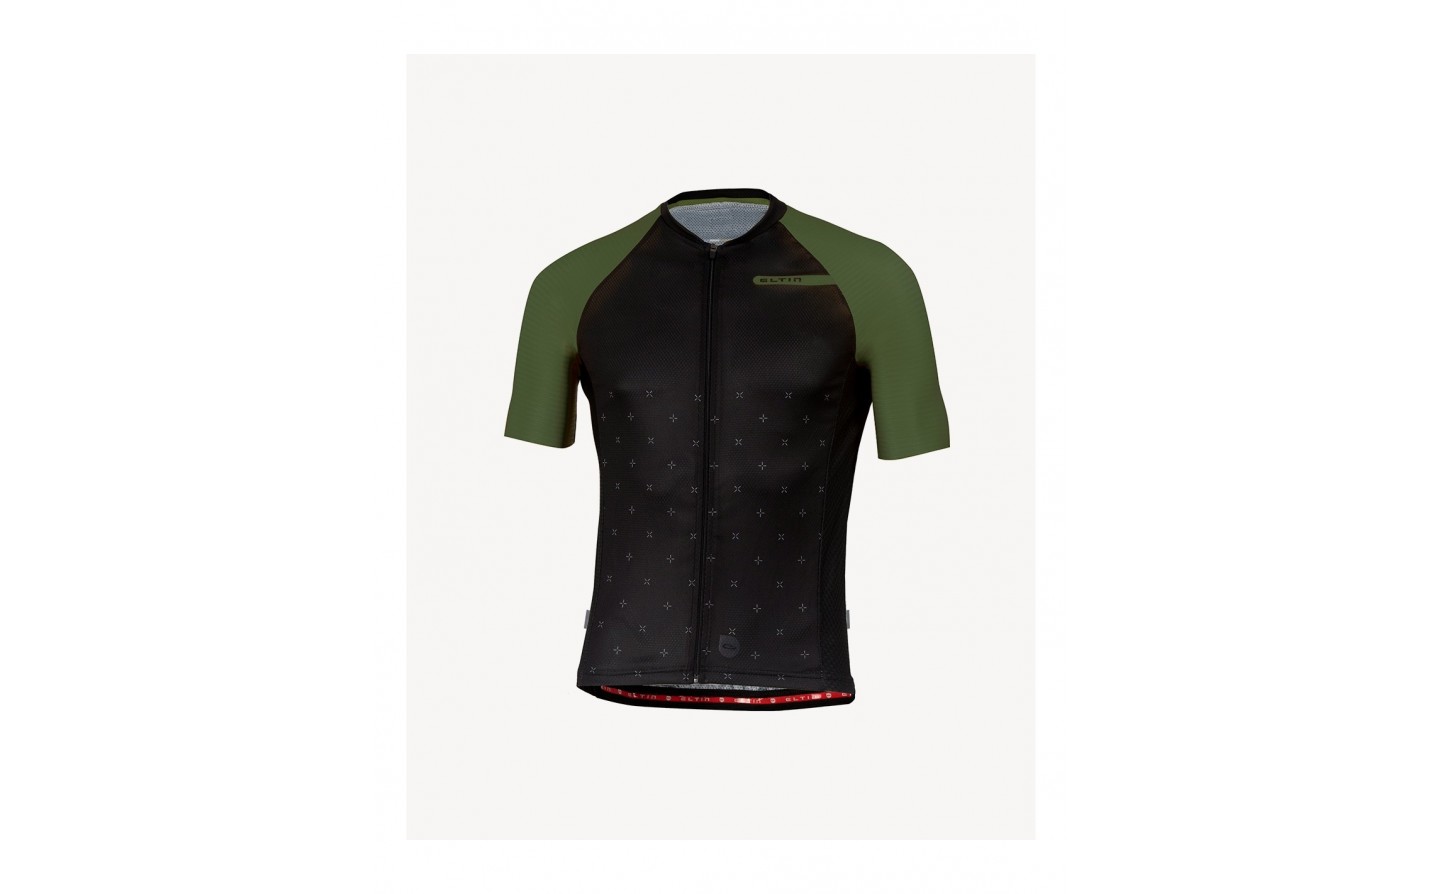 Maillot ciclismo Resistance negro y verde oliva